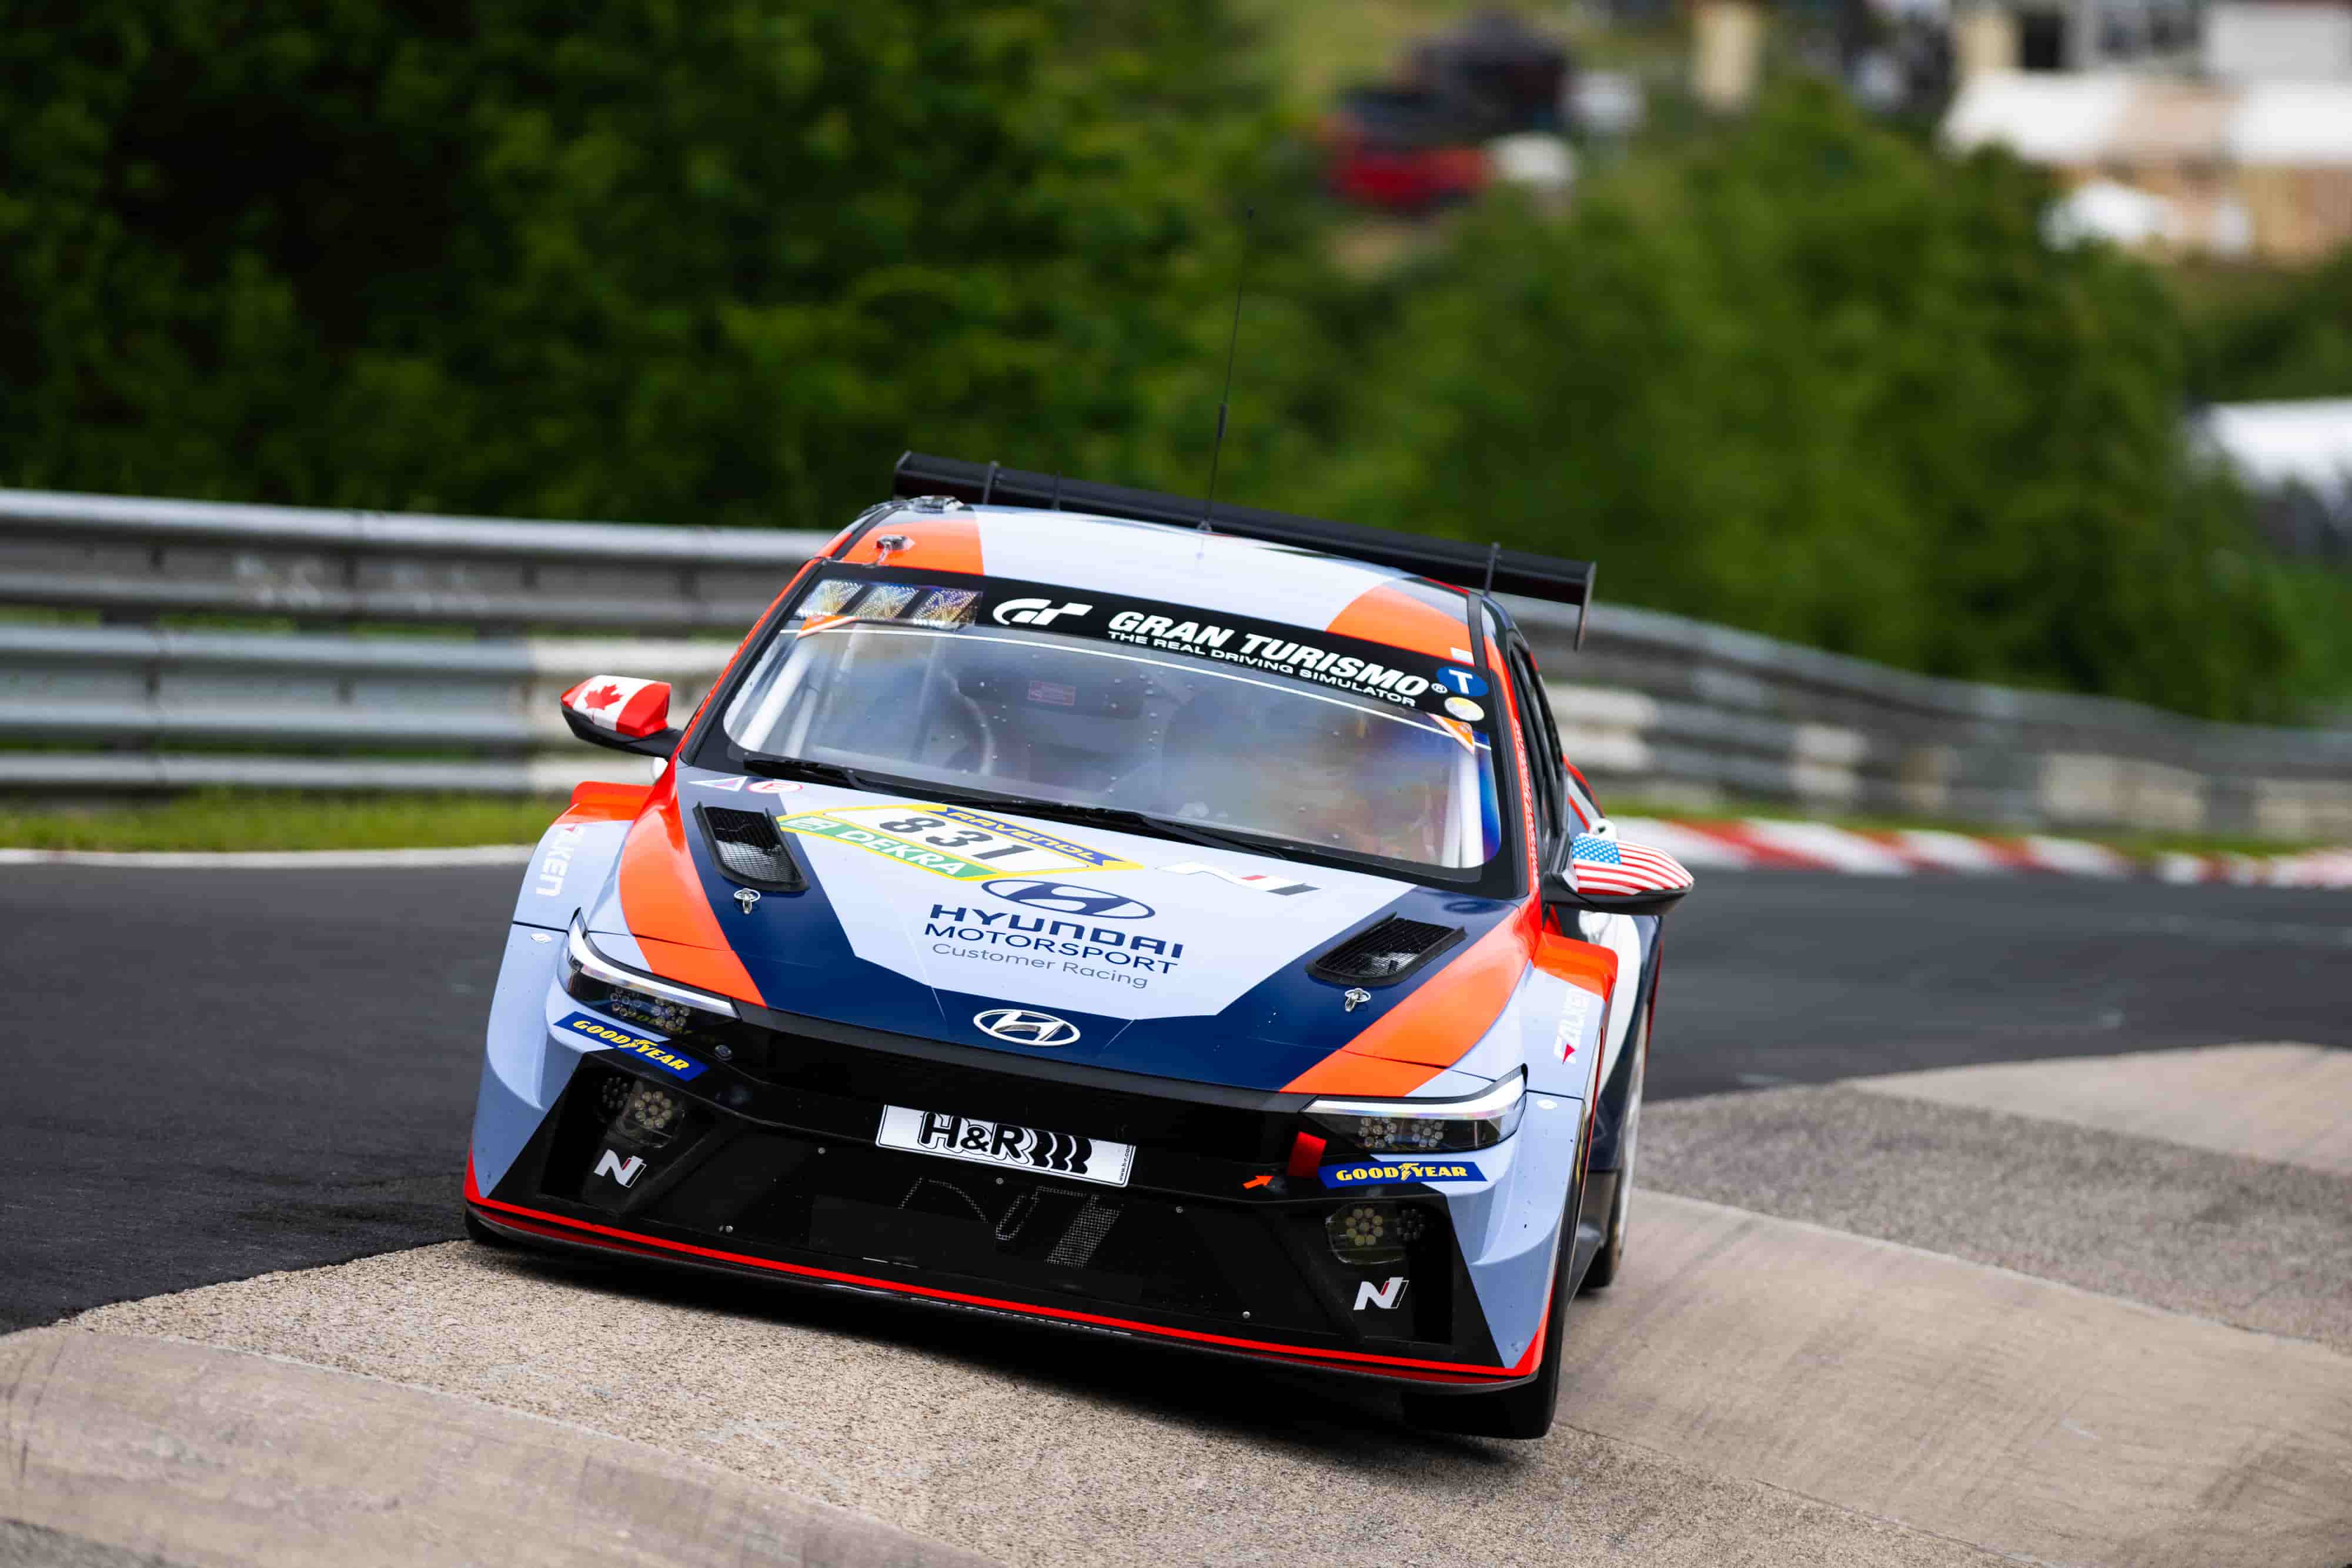 The Hyundai Elantra N TCR secured its fourth consecutive TCR class victory at the Nürburgring 24 Hours, overcoming severe fog and a 14-hour red flag, achieving a historic 1-2-3 finish.